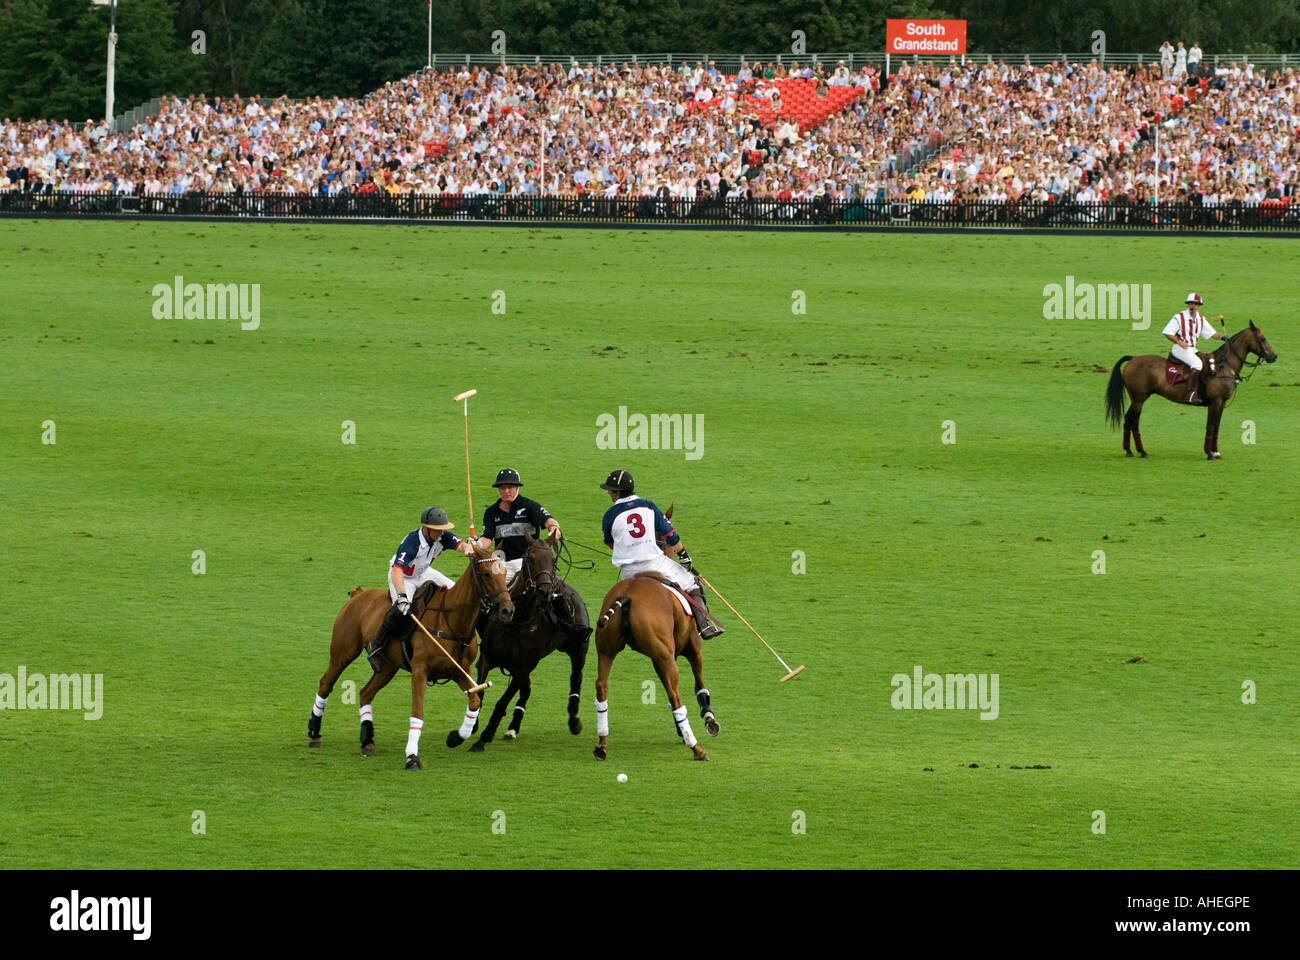 Polo Cartier International Polo at the Guards Club Smiths Lawn  Windsor Great Park Egham Surrey England 2000s 2006 HOMER SYKES Stock Photo